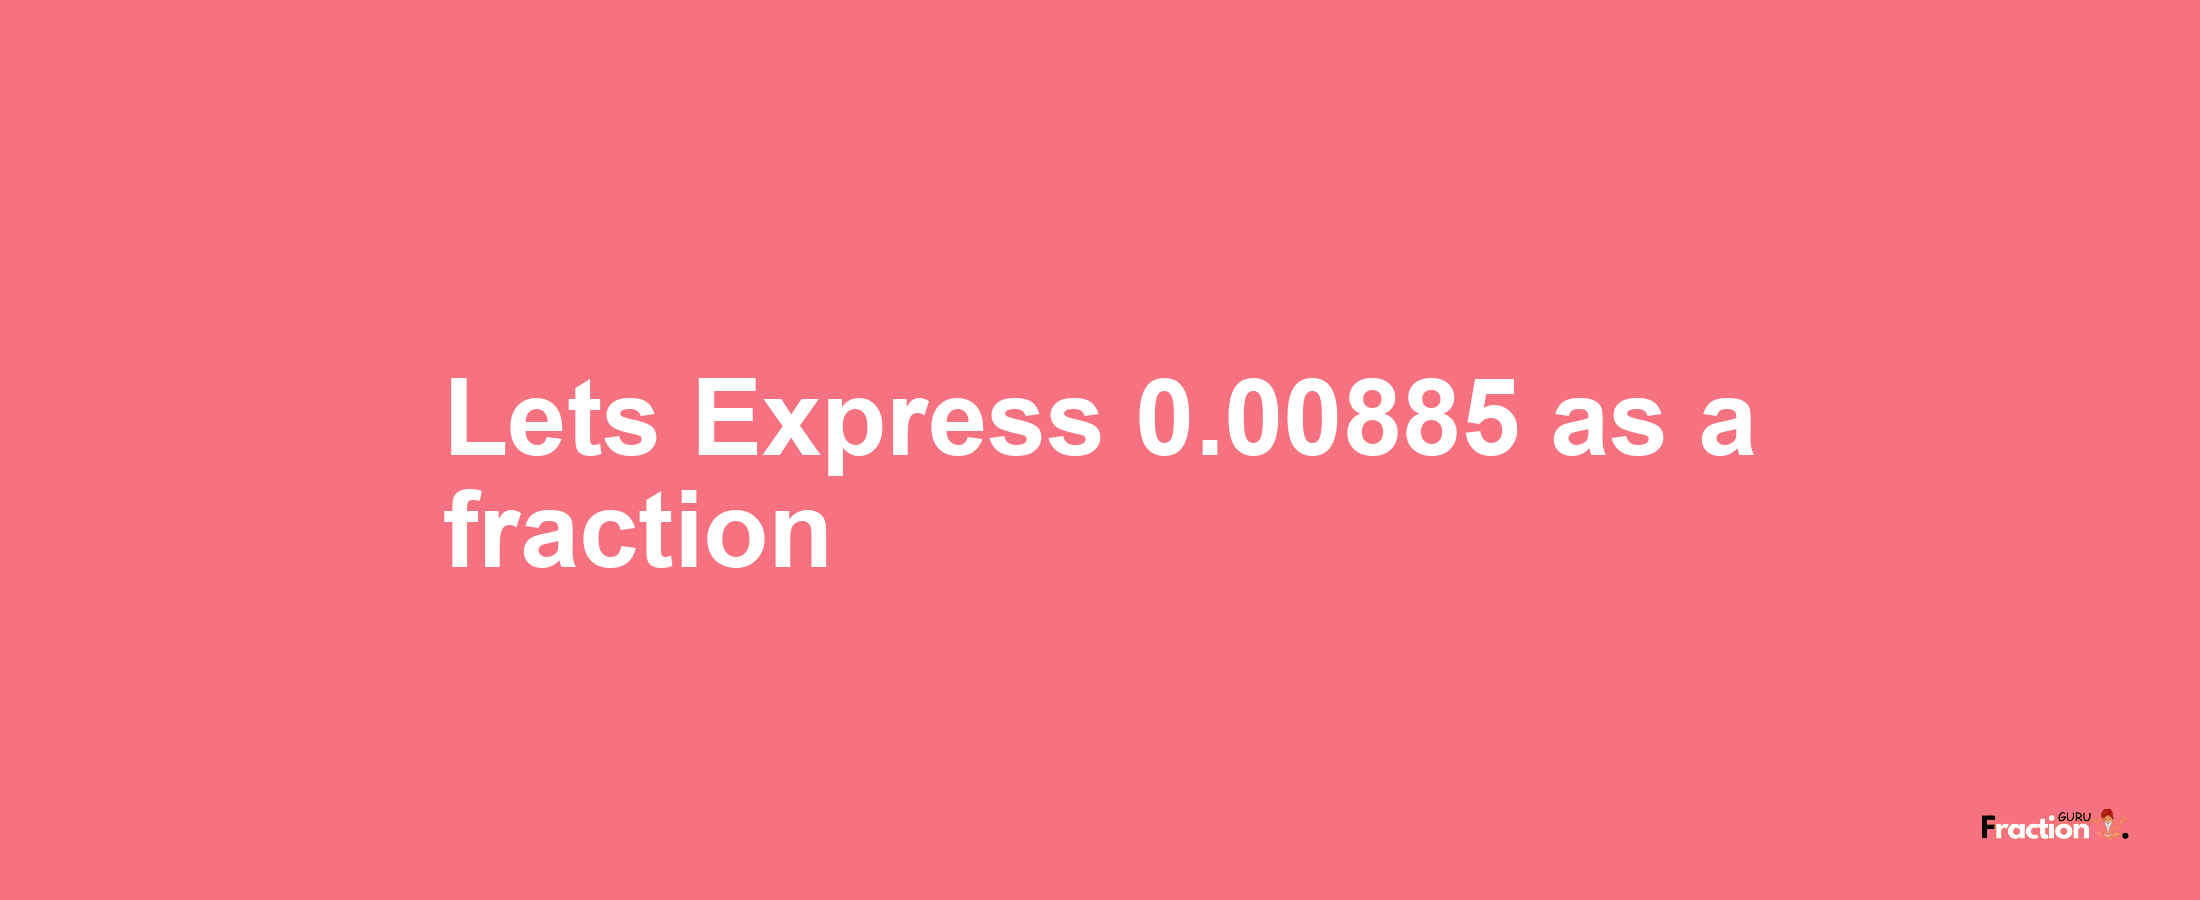 Lets Express 0.00885 as afraction